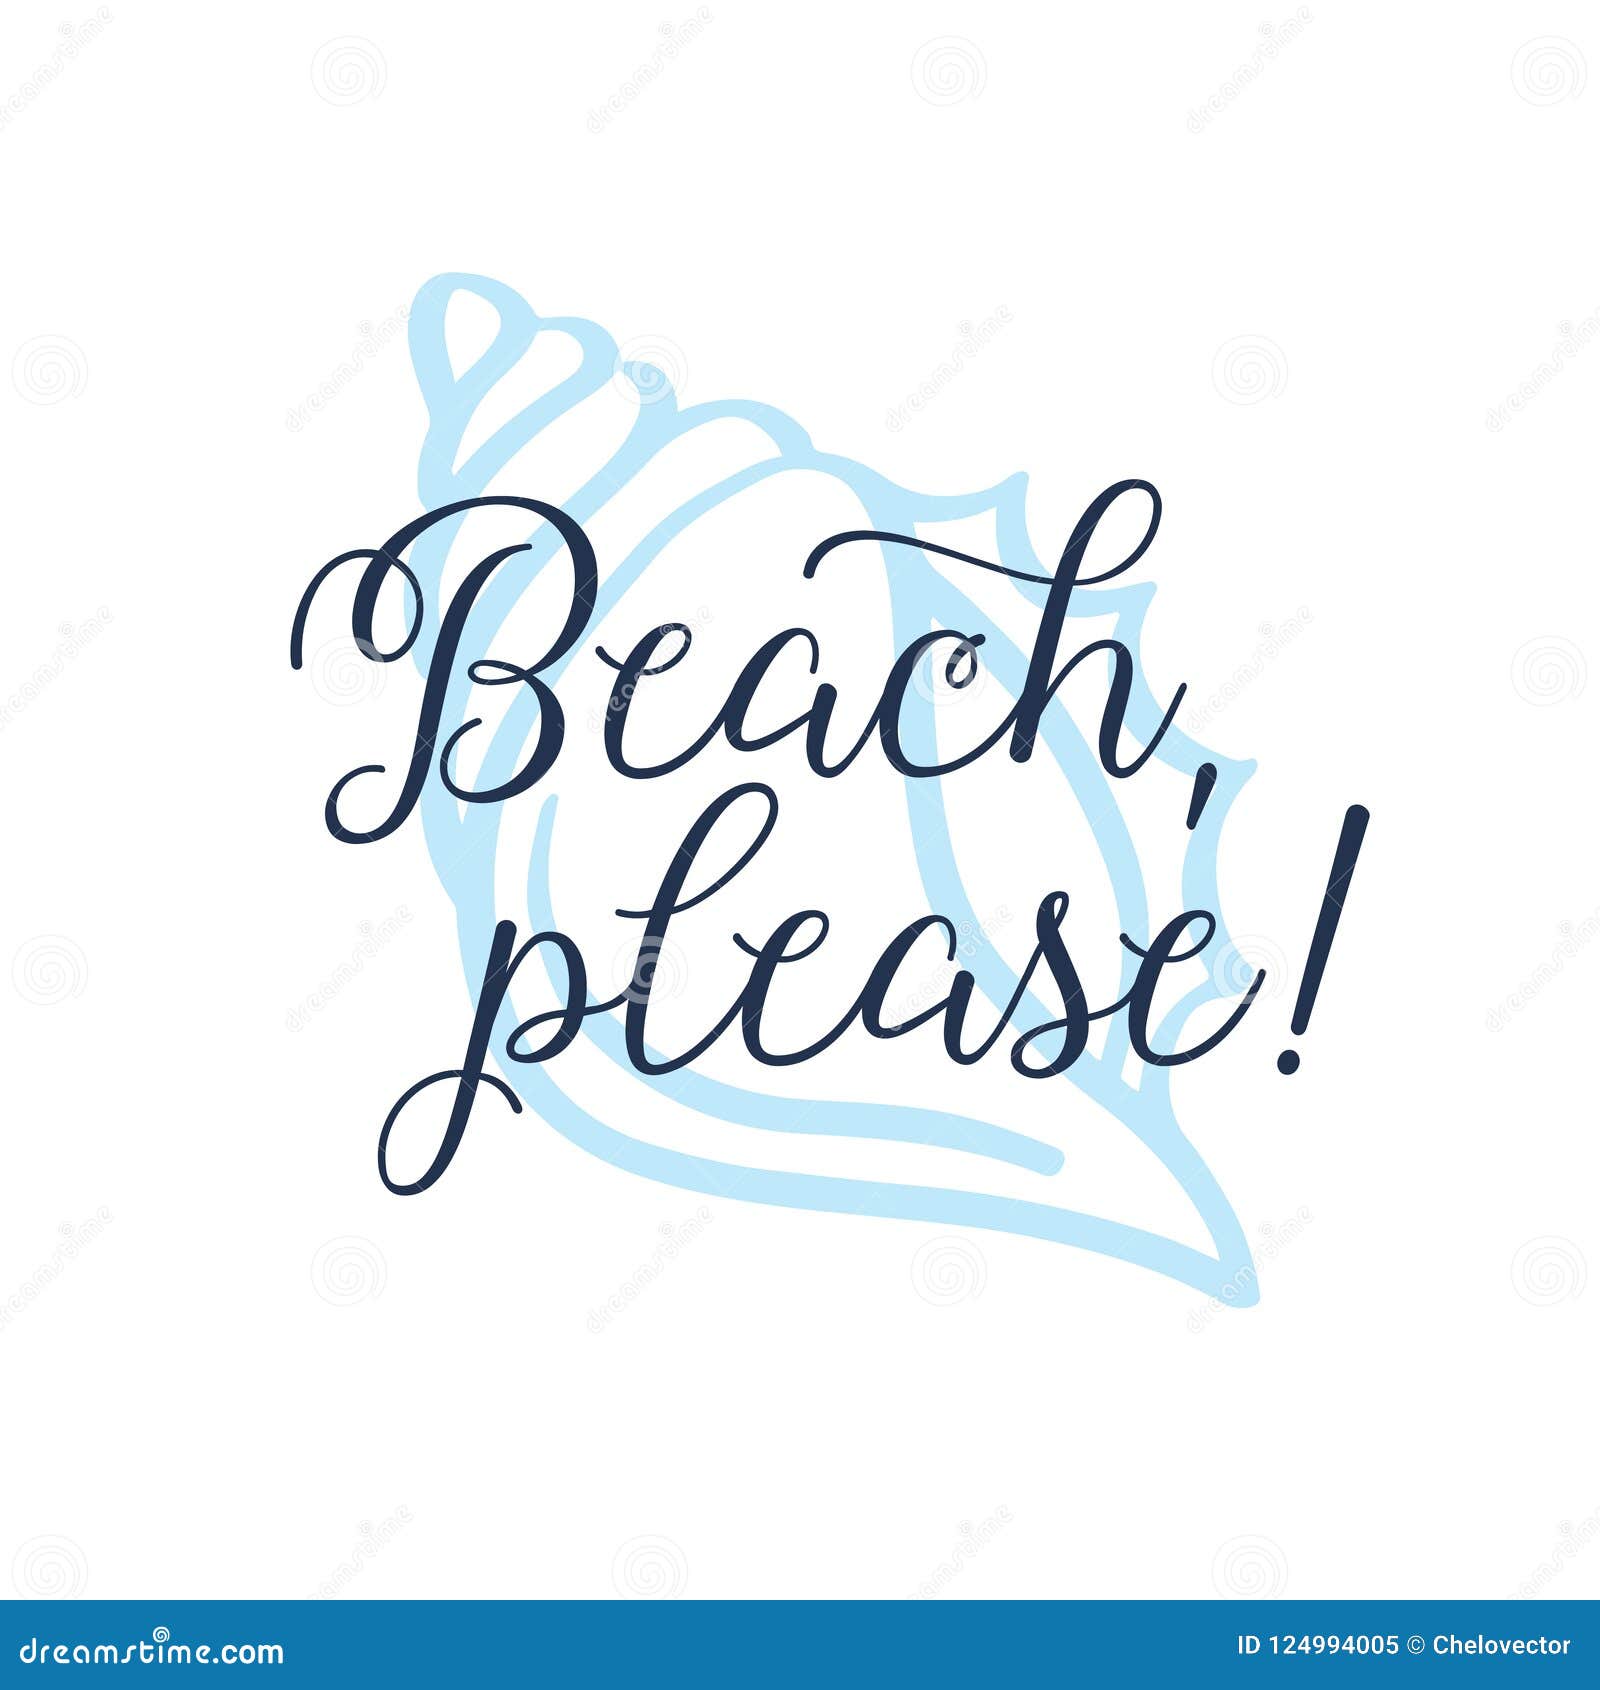 beach please calligraphy tshirt  with shell background.  .